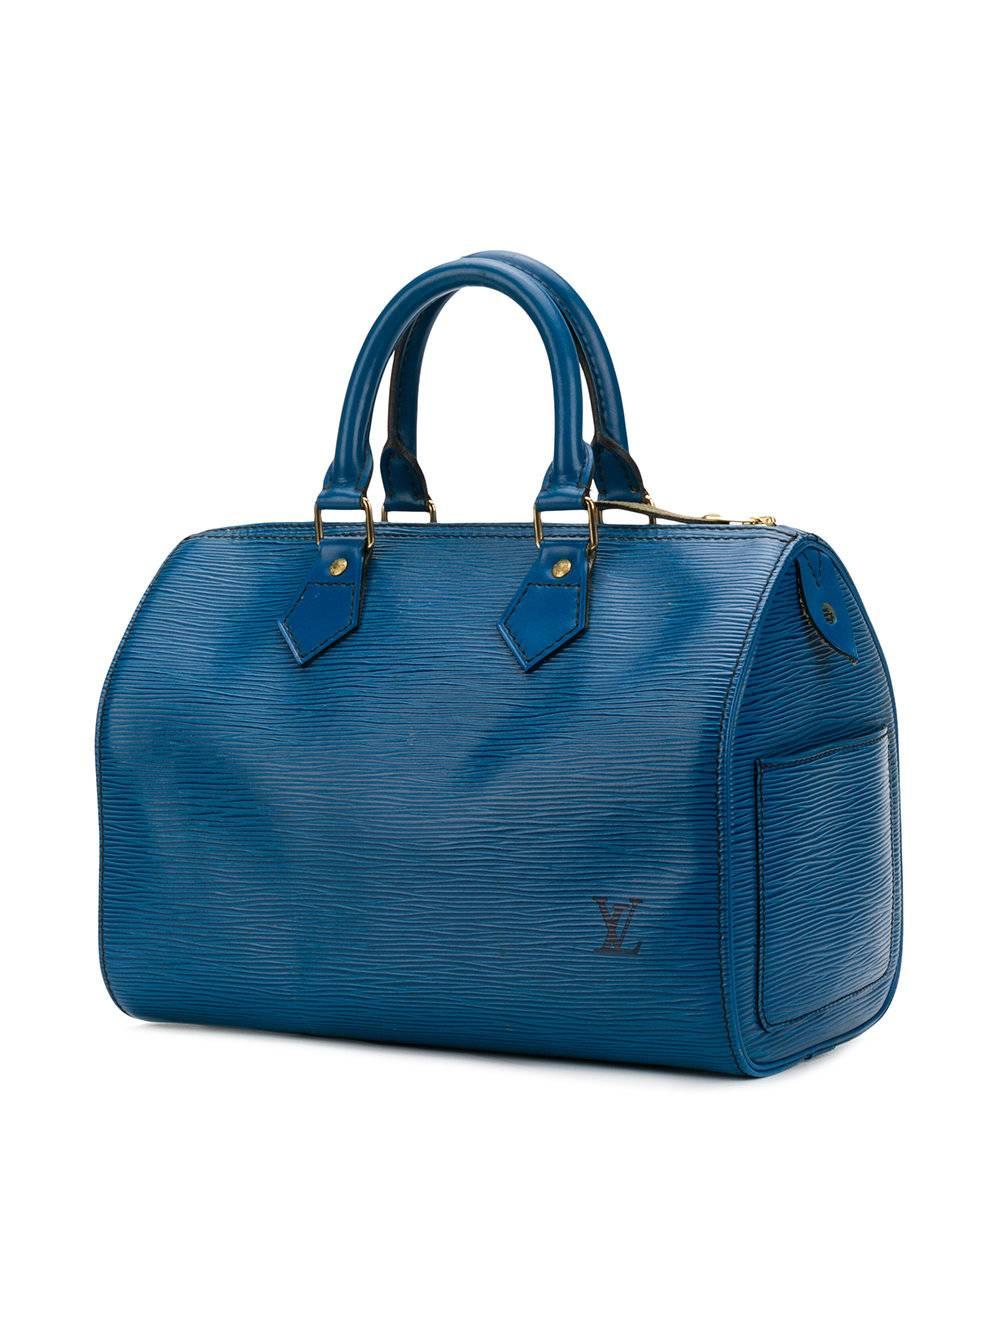 Blue leather Epi textured tote bag from Louis Vuitton Vintage featuring top handles, a main internal compartment and a zip fastening.

Colour: Blue

Material: Epi Leather

Condition: 8/10

This item has been gently used. Some visible marks on the